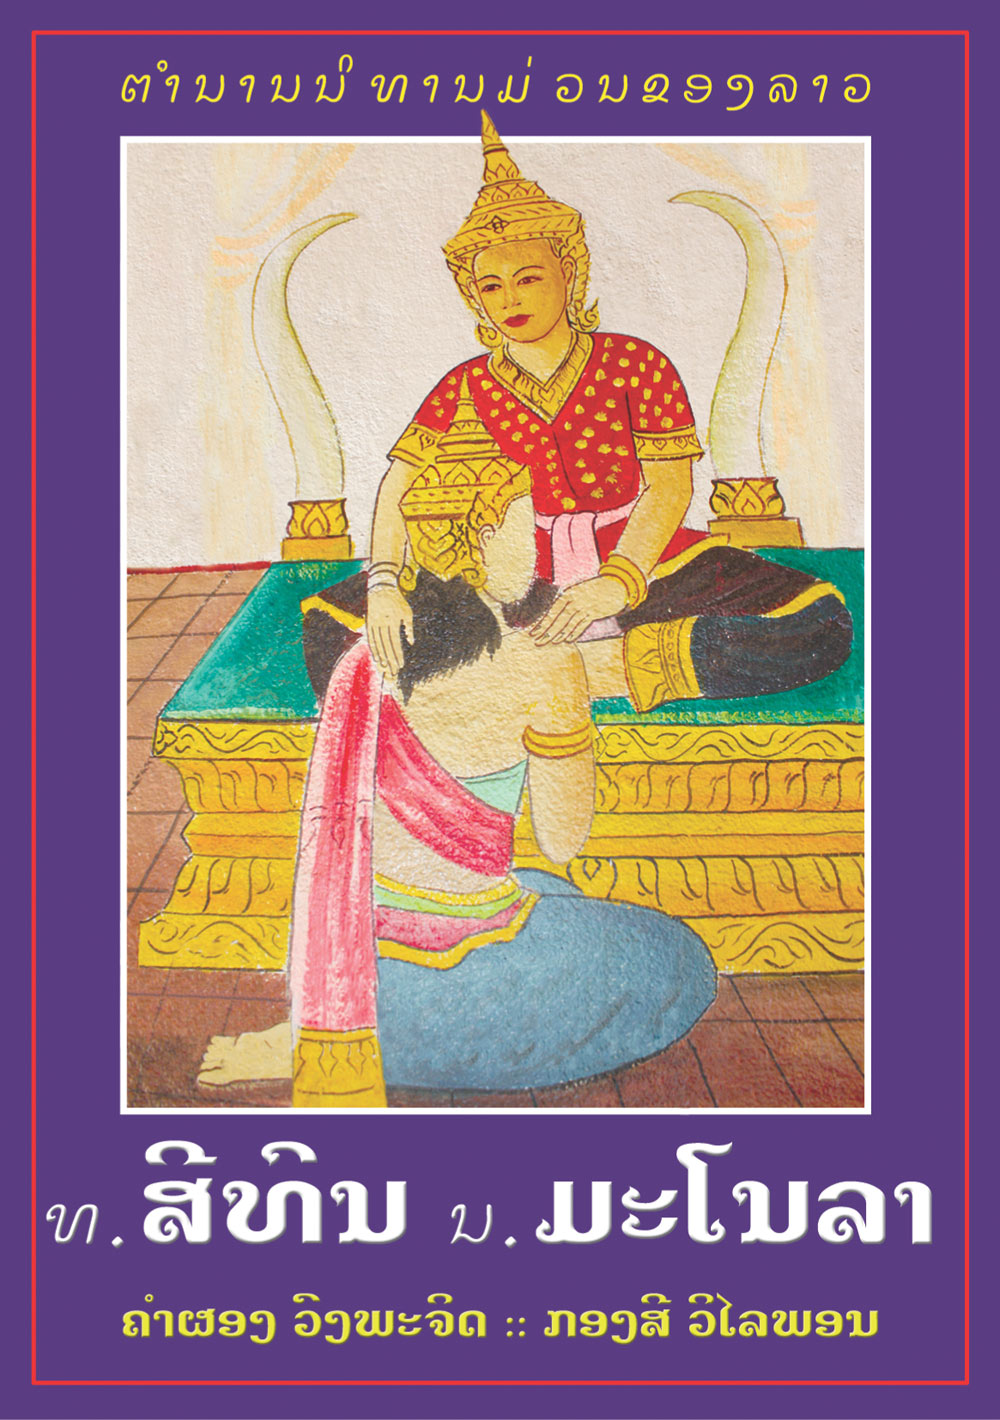 Sithon and Manola large book cover, published in Lao language